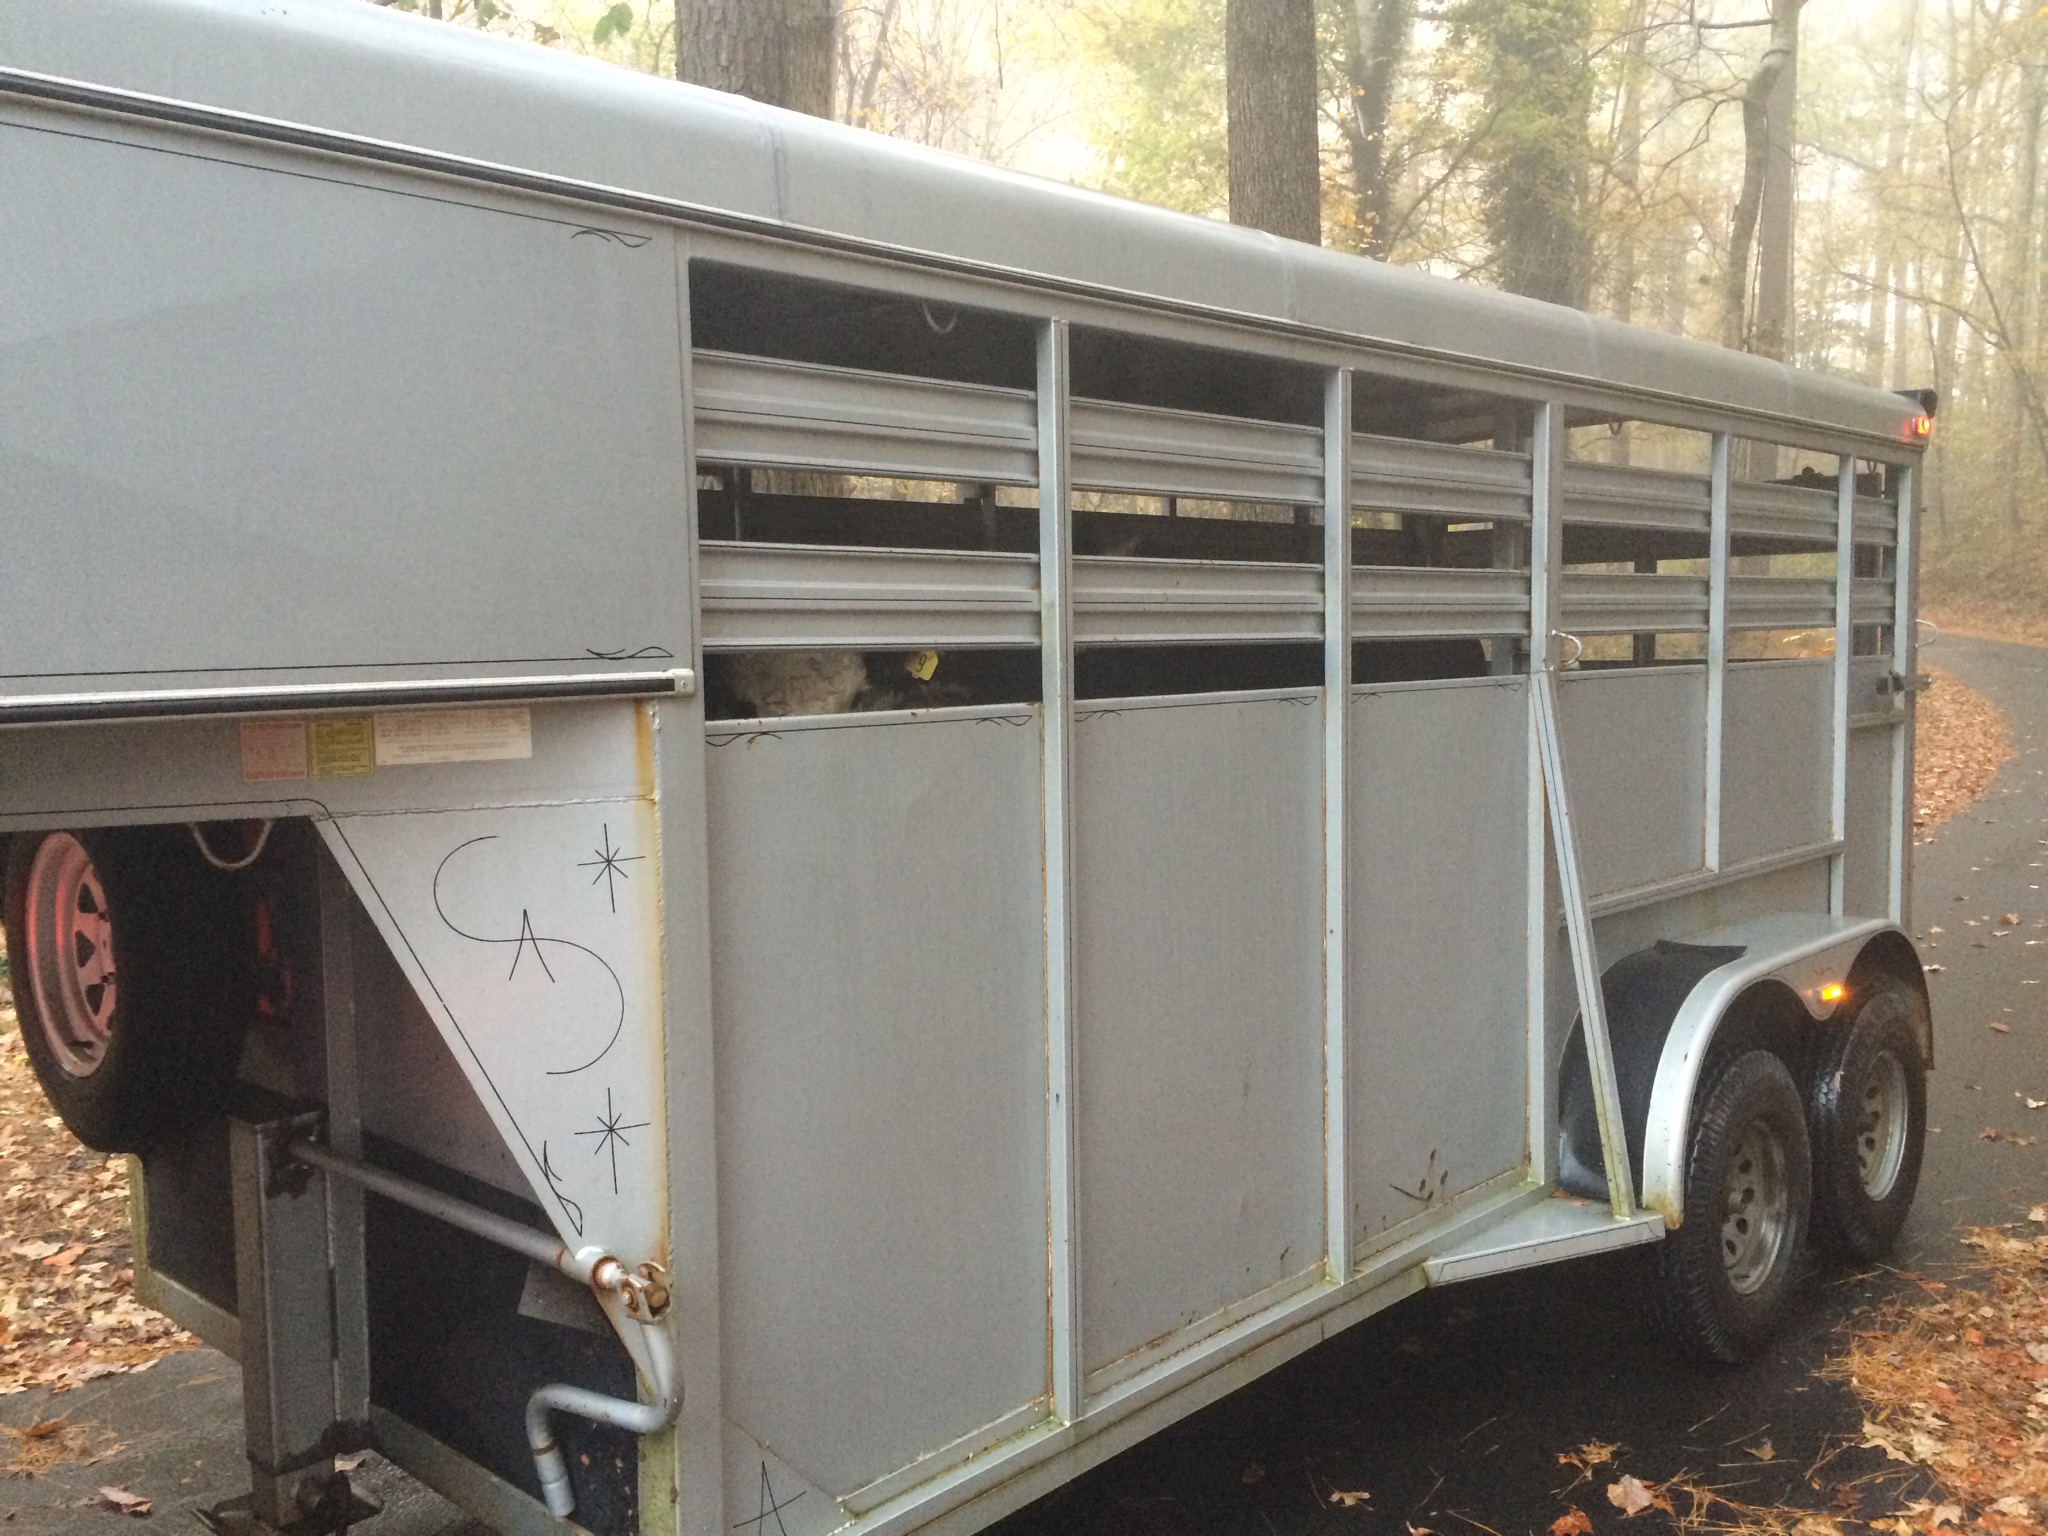 Kinda hard to see but the cows are in the trailer, waiting for their ride to Chaudhry's.